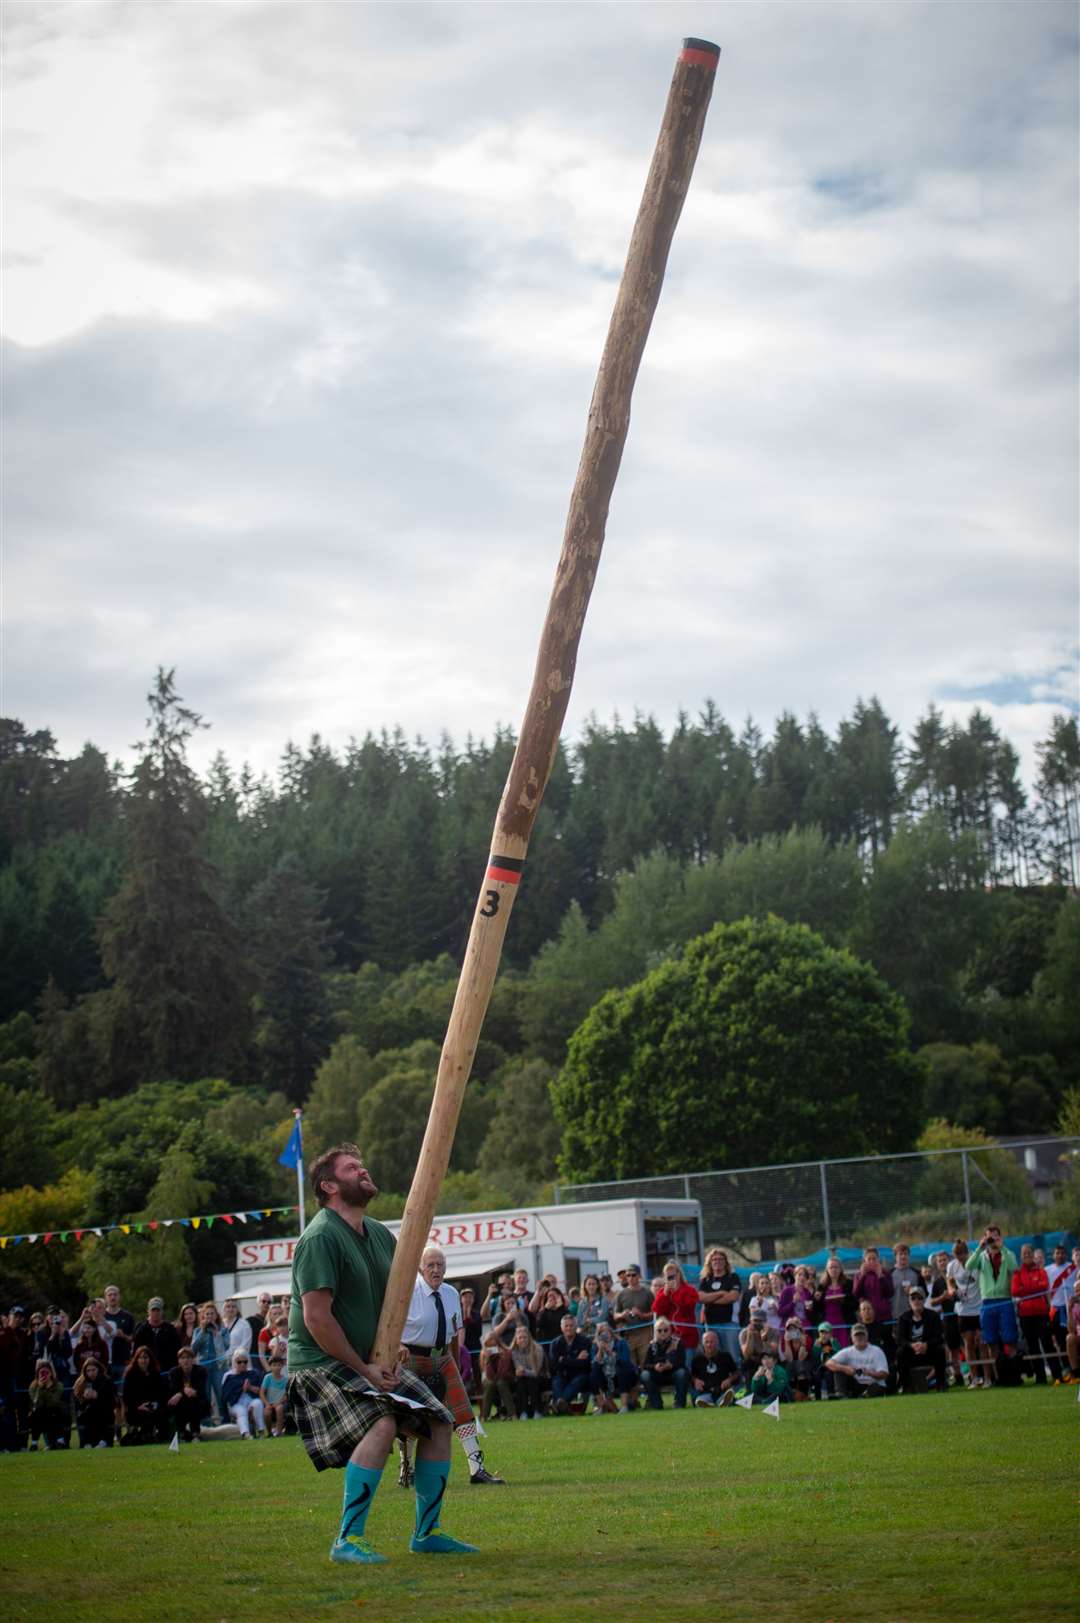 Watch in awe at the feats of strength displayed in the Heavies. Picture: Callum Mackay